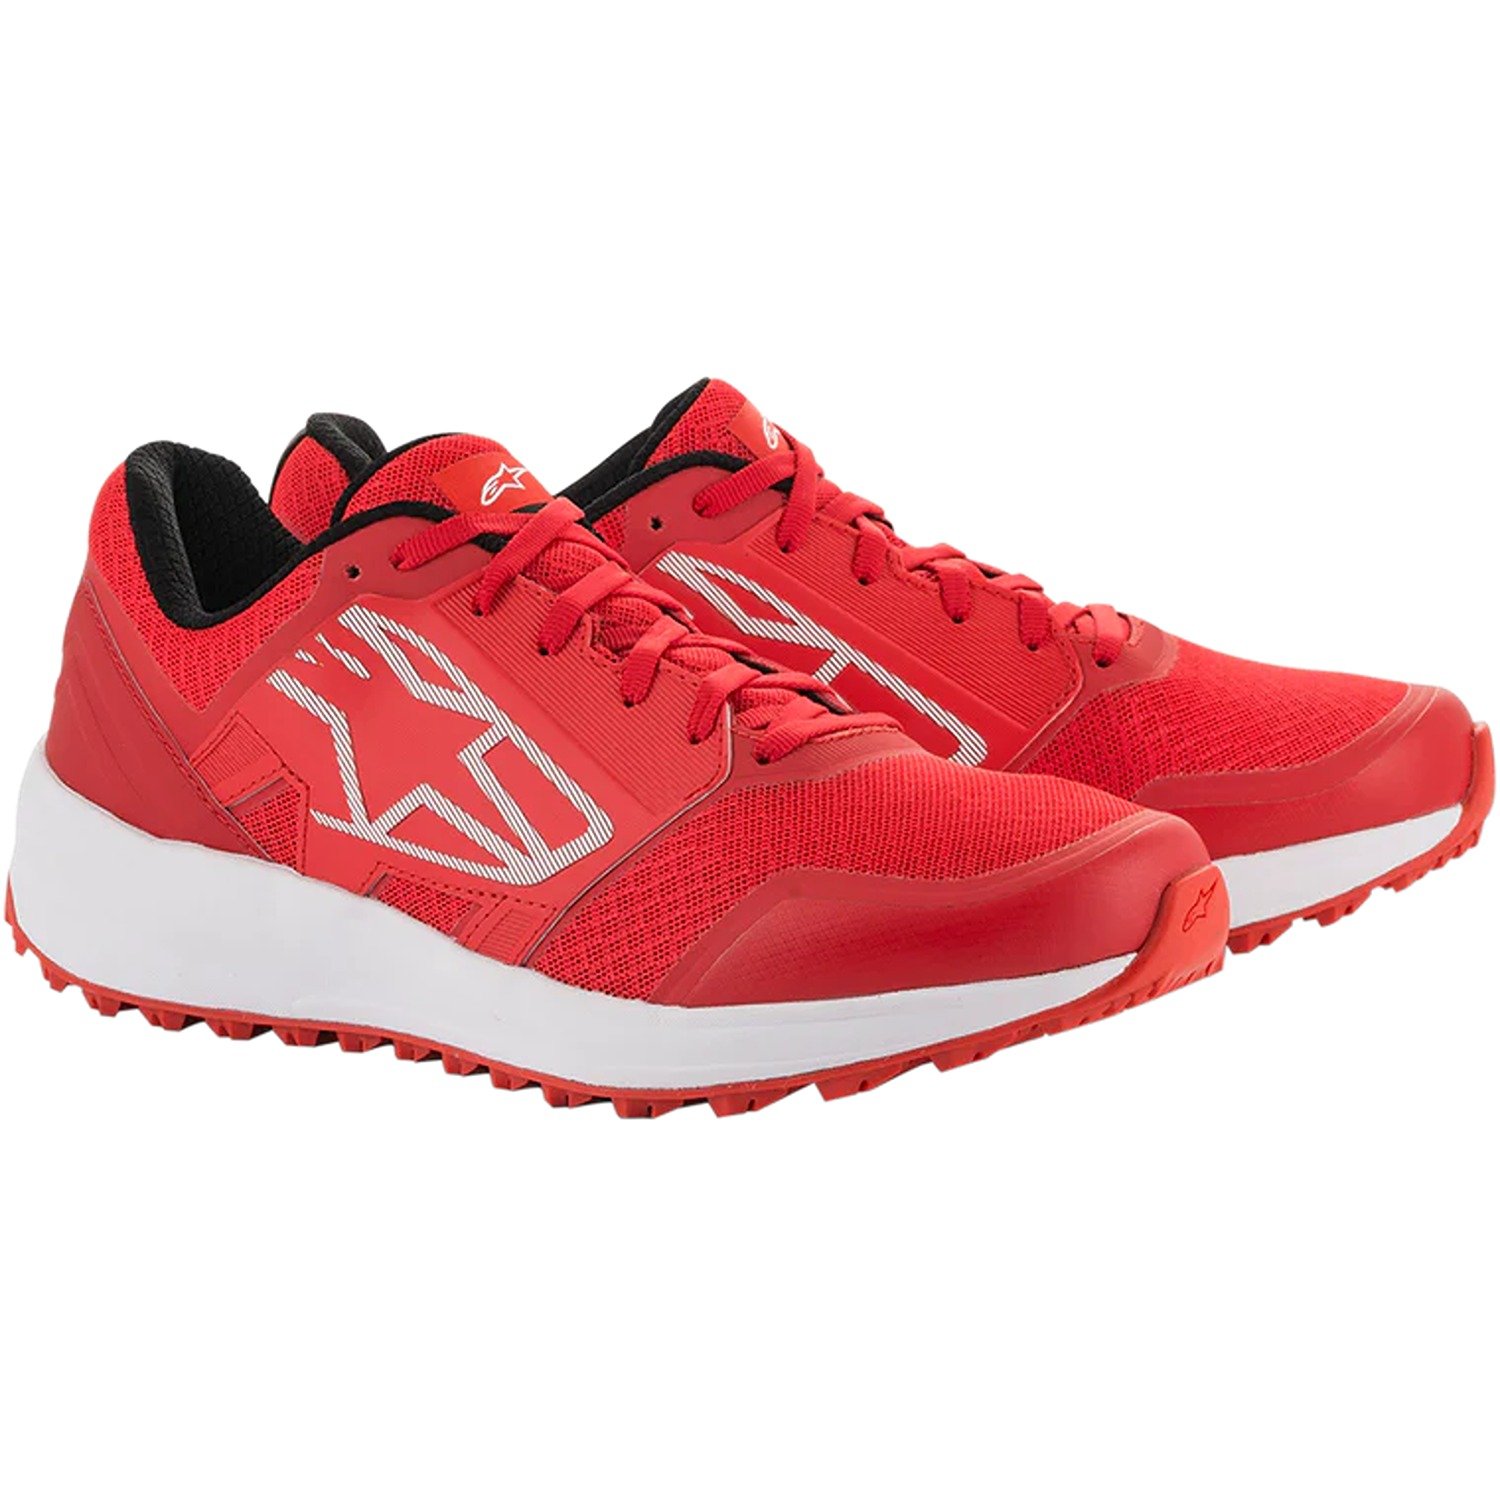 Image of Alpinestars Meta Trail Shoes Red White Size US 55 ID 8059175107665